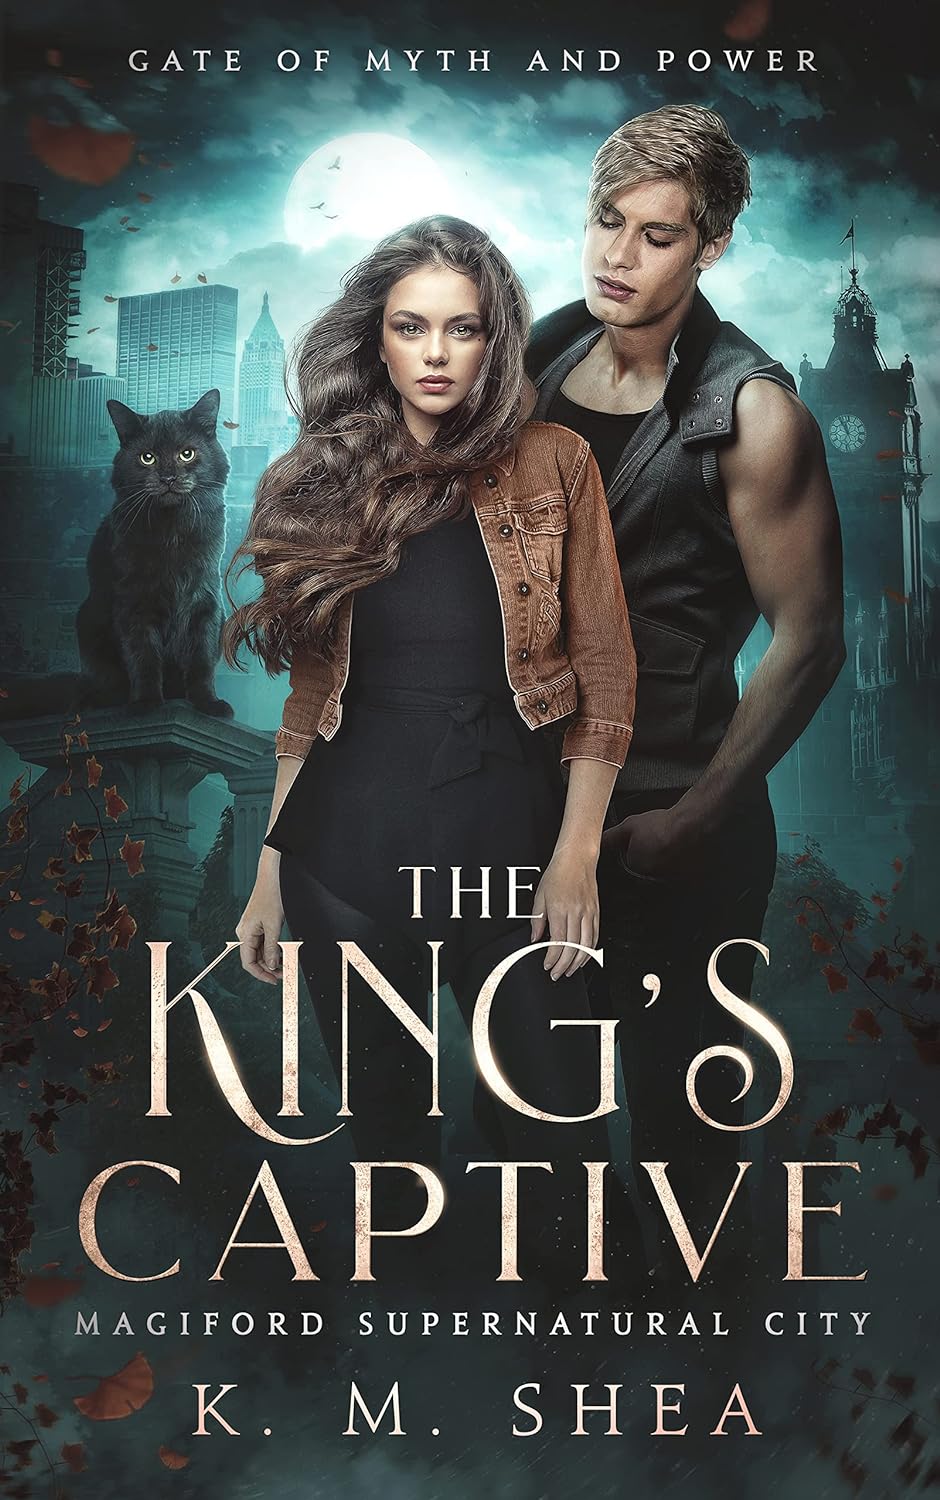 The Kings Captive (Gate of Myth and Power Book 1) by K.M. Shea